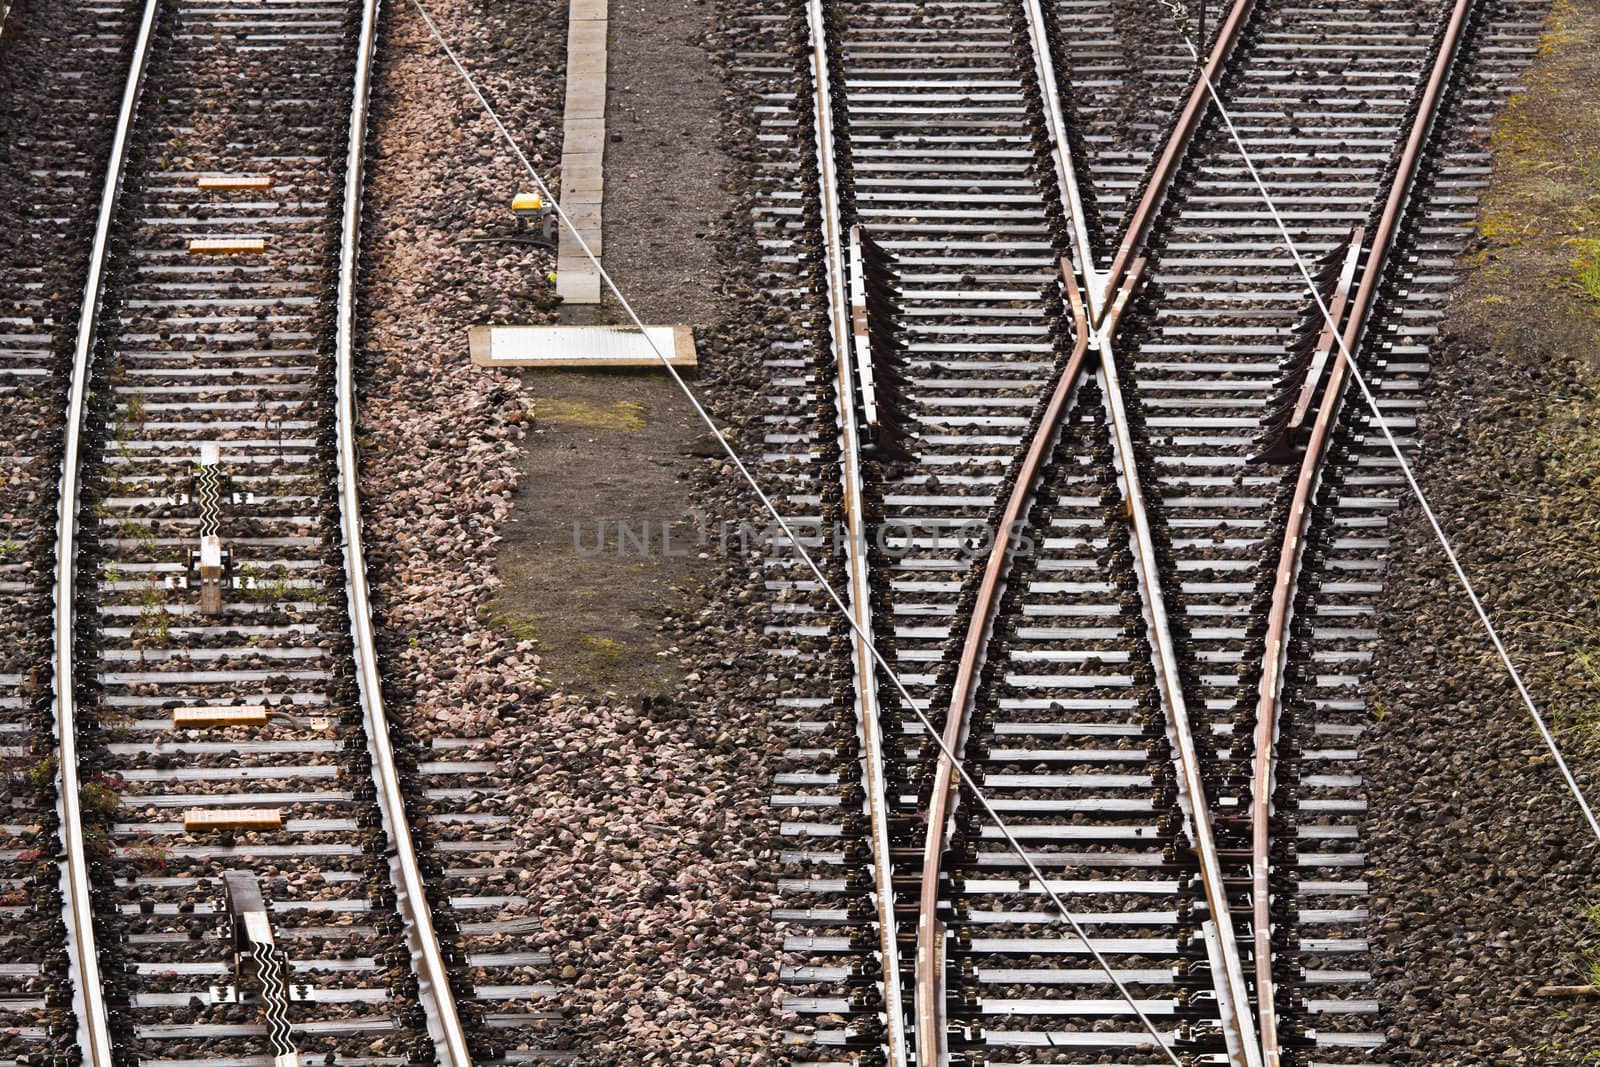 Railway line with switch - conceptual for making choices - horizontal image